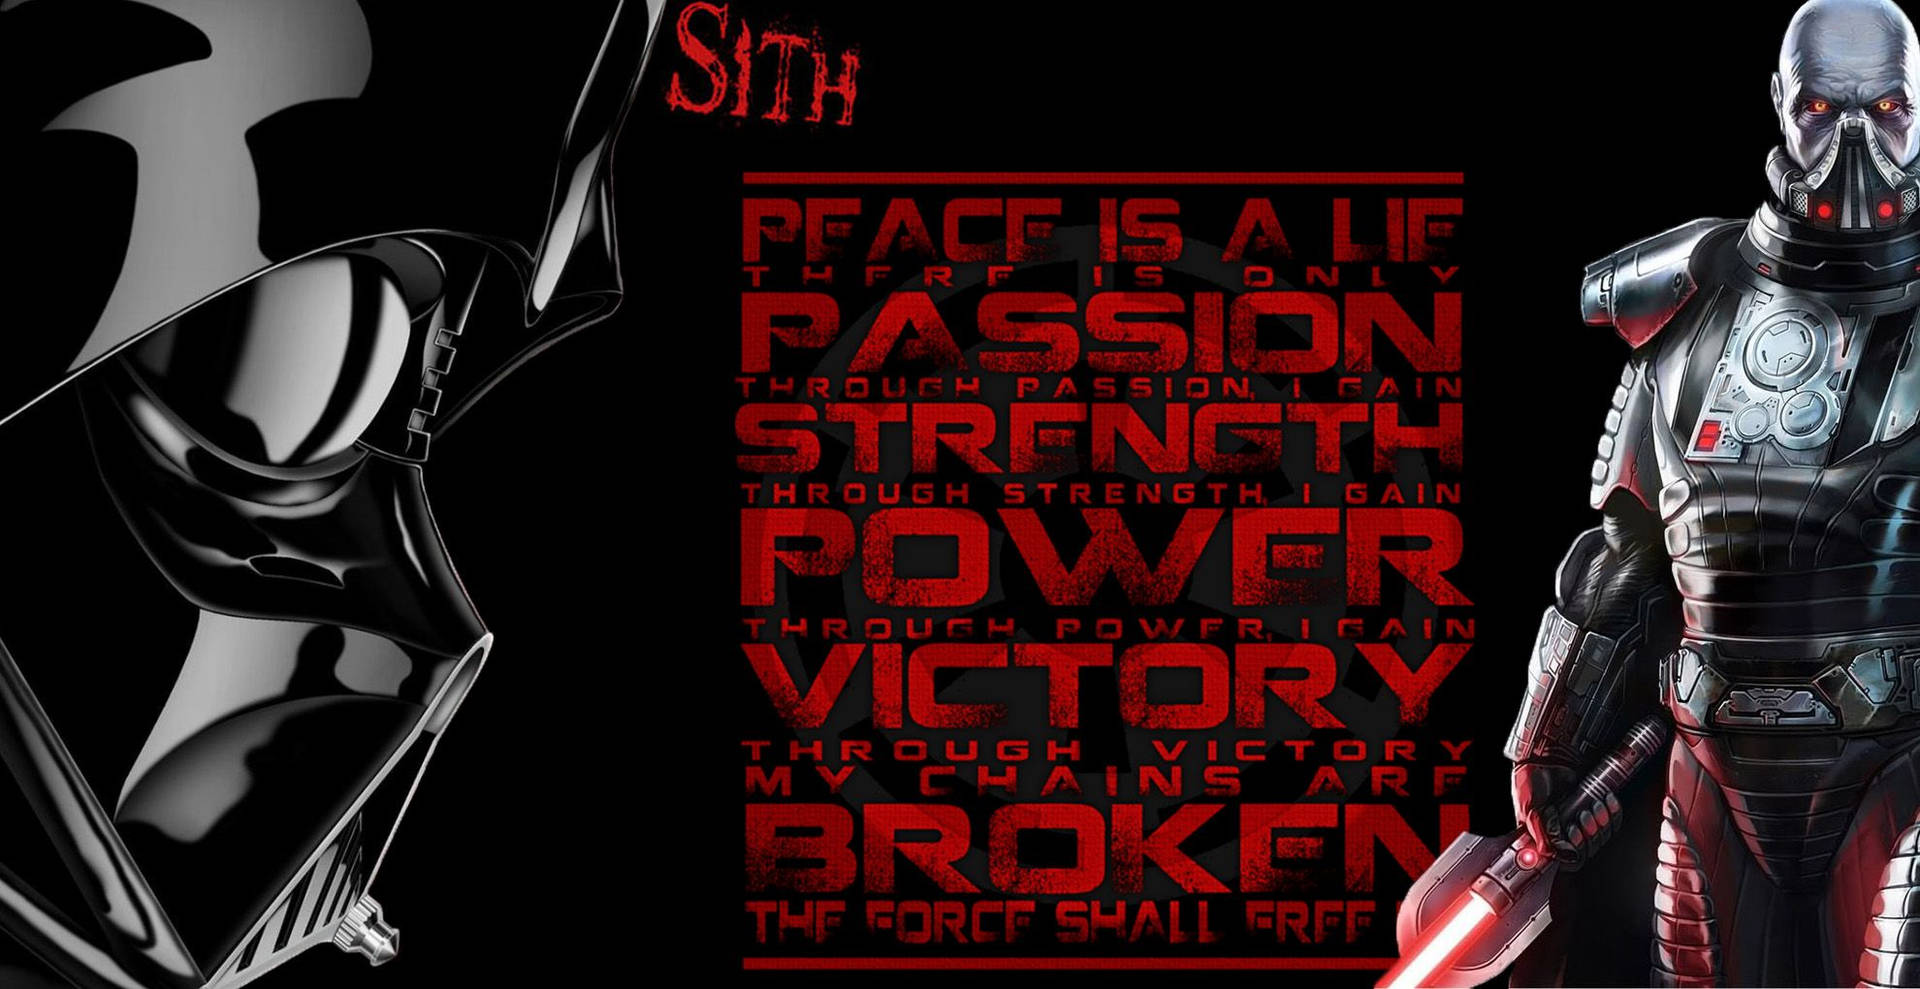 Sith Codes Poster Wallpaper